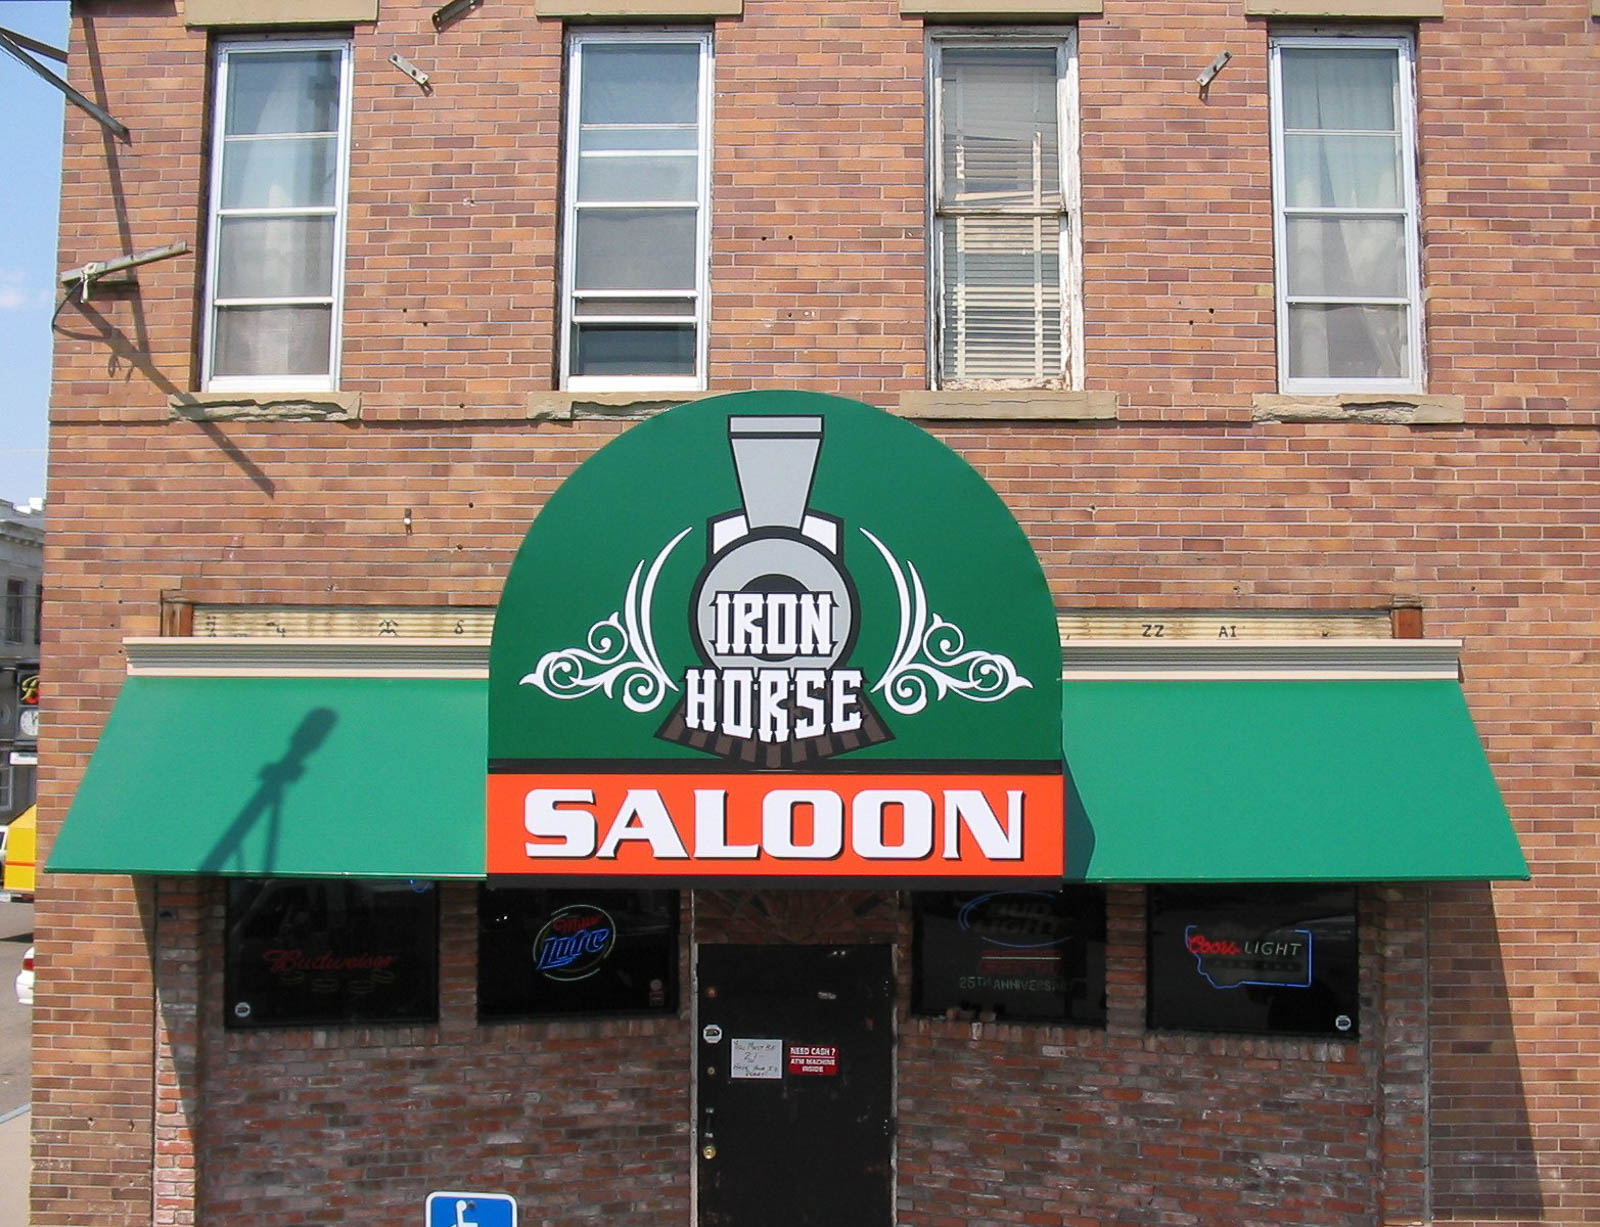 Awning for Iron Horse Saloon